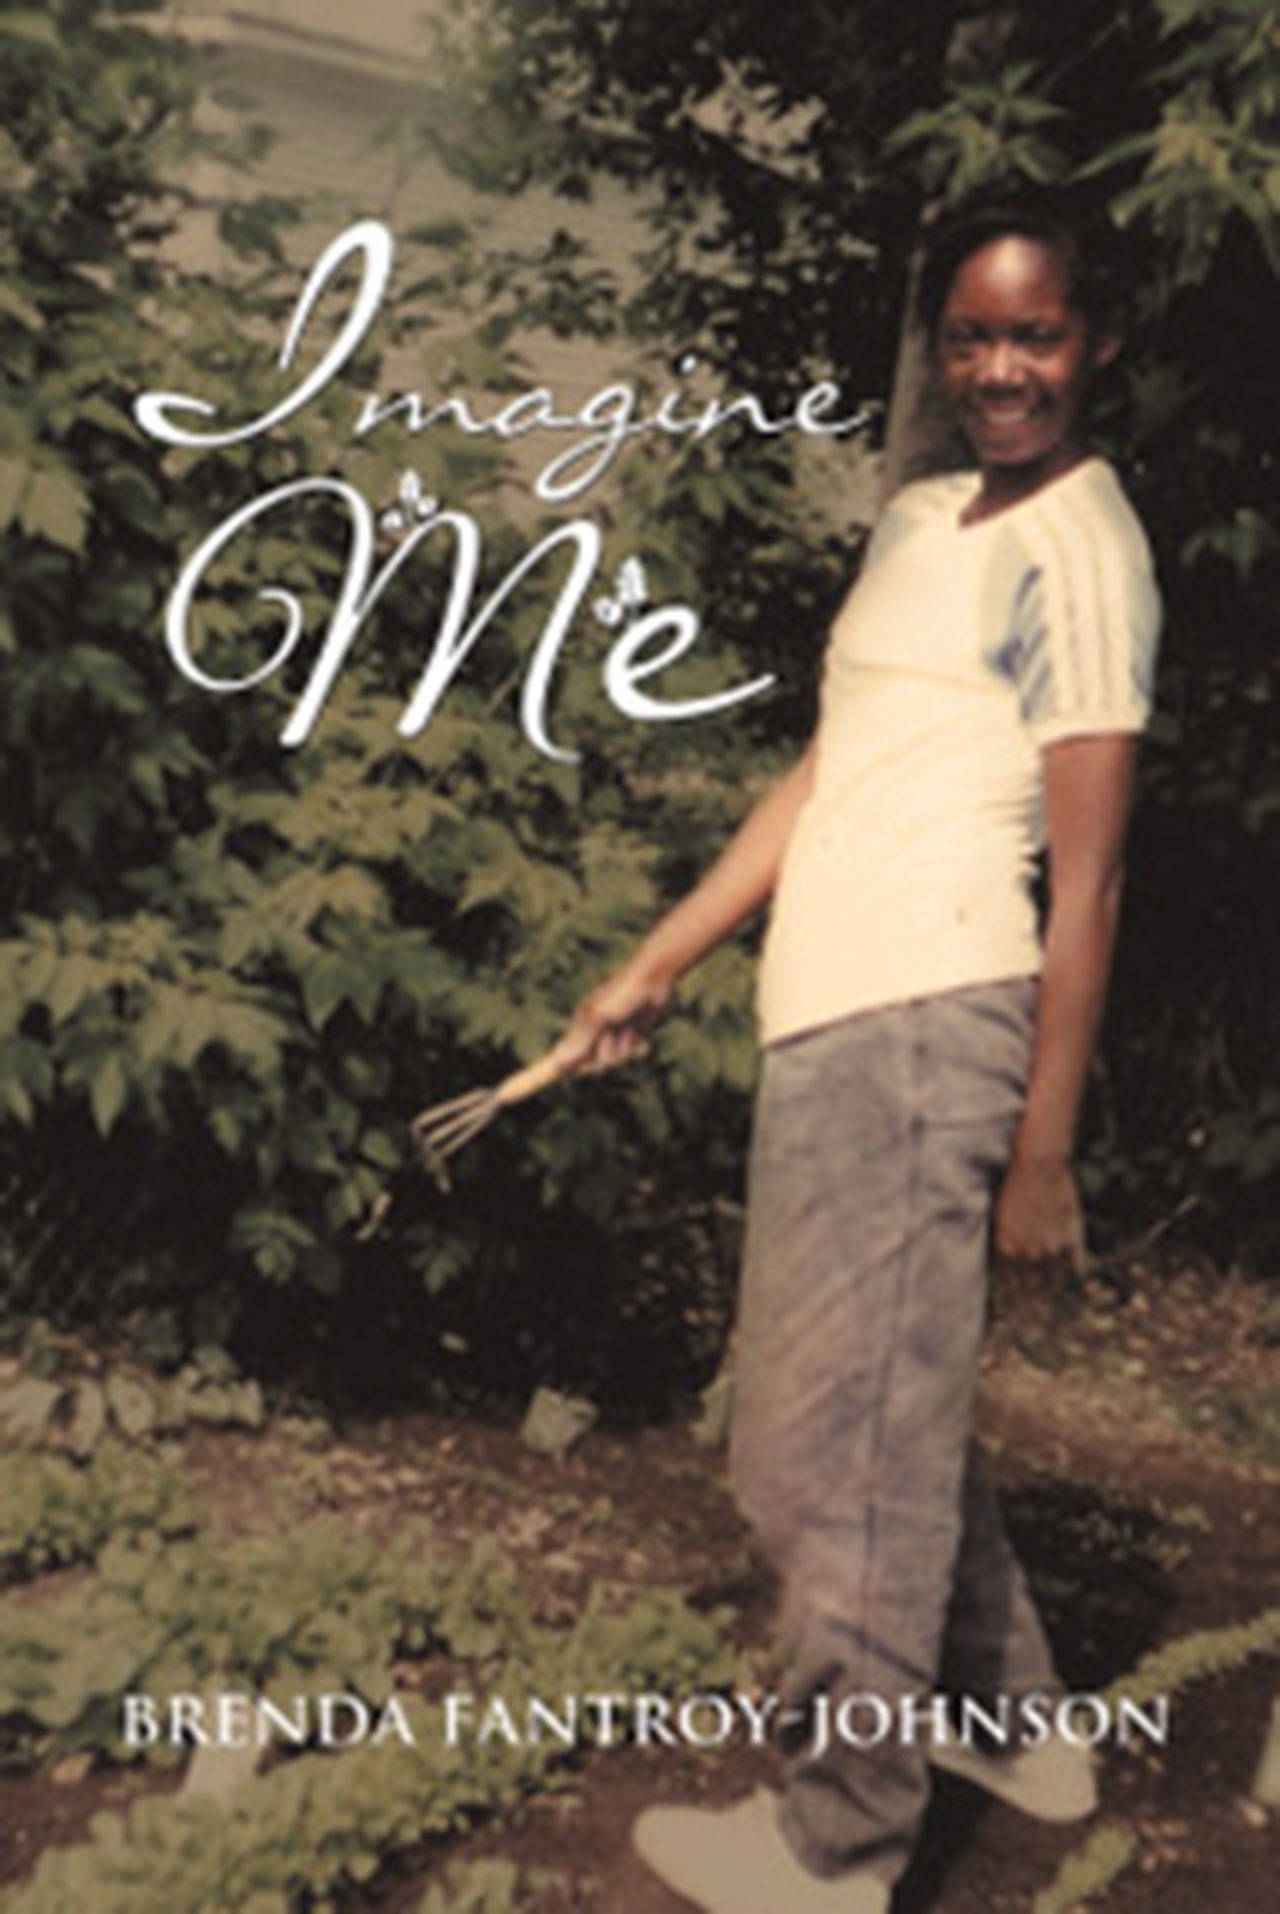 Image courtesy of 
Brenda Fantroy-Johnson                                Bainbridge Island author Brenda Fantroy-Johnson will visit Eagle Harbor Book Company to read from and discuss her new memoir “Imagine Me” at 
7 p.m. Thursday, June 8.